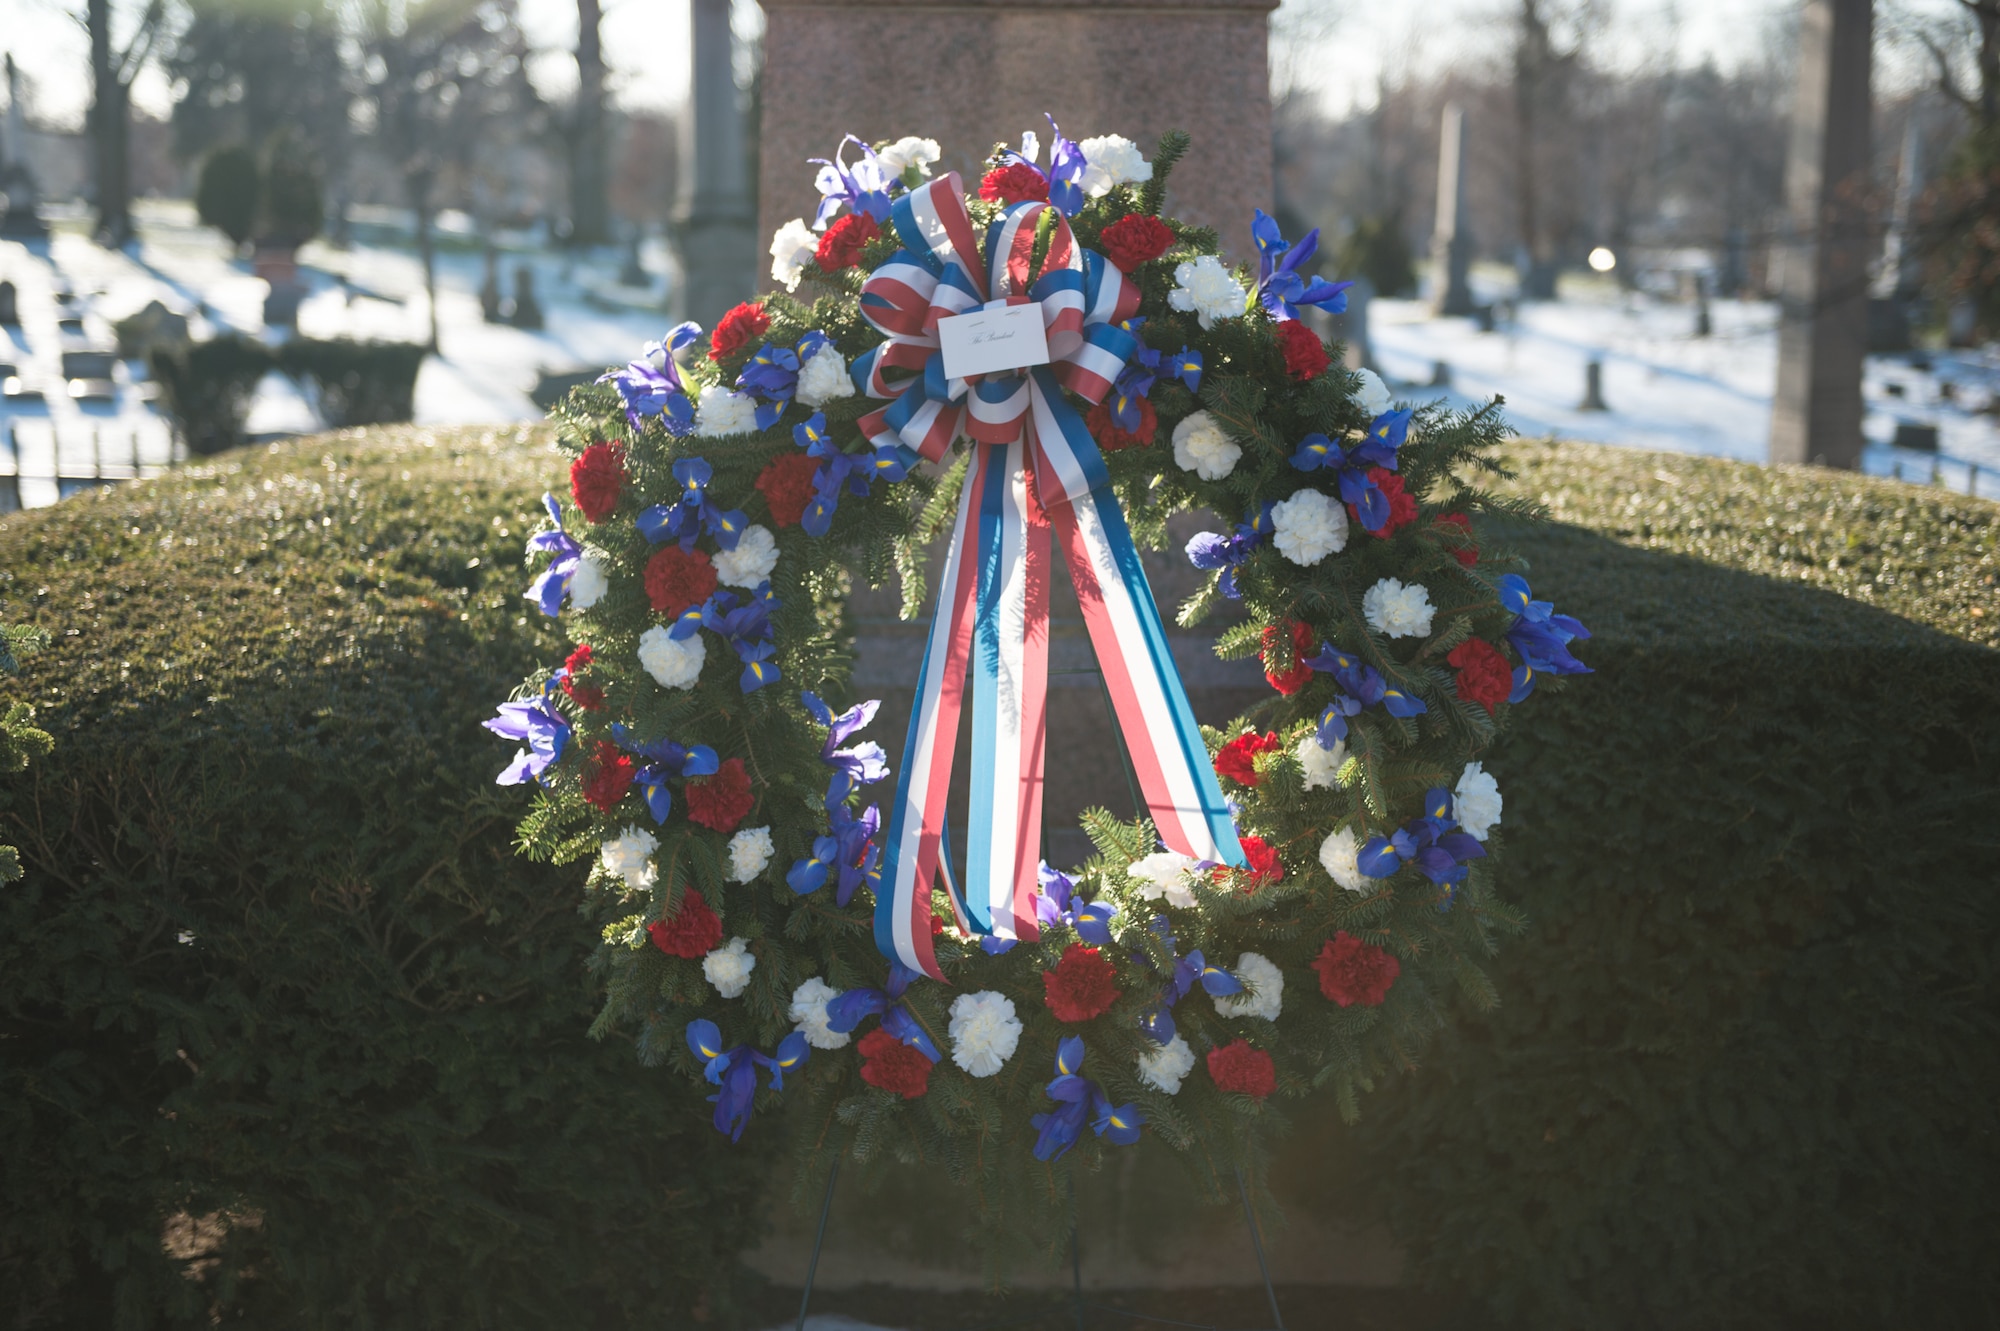 A wreath provided by the White House on behalf of President Barack Obama sits on display at the grave of President Millard Fillmore, Forest Lawn Cemetery, Buffalo, N.Y., Jan. 7, 2015. The 107th AW from the Niagara Falls Air Reserve Station, Niagara Falls, N.Y., presented the wreath at a ceremony held by the University at Buffalo, a school which Fillmore was one of the founders. (U.S. Air National Guard Photo/ Staff Sgt. Ryan Campbell)